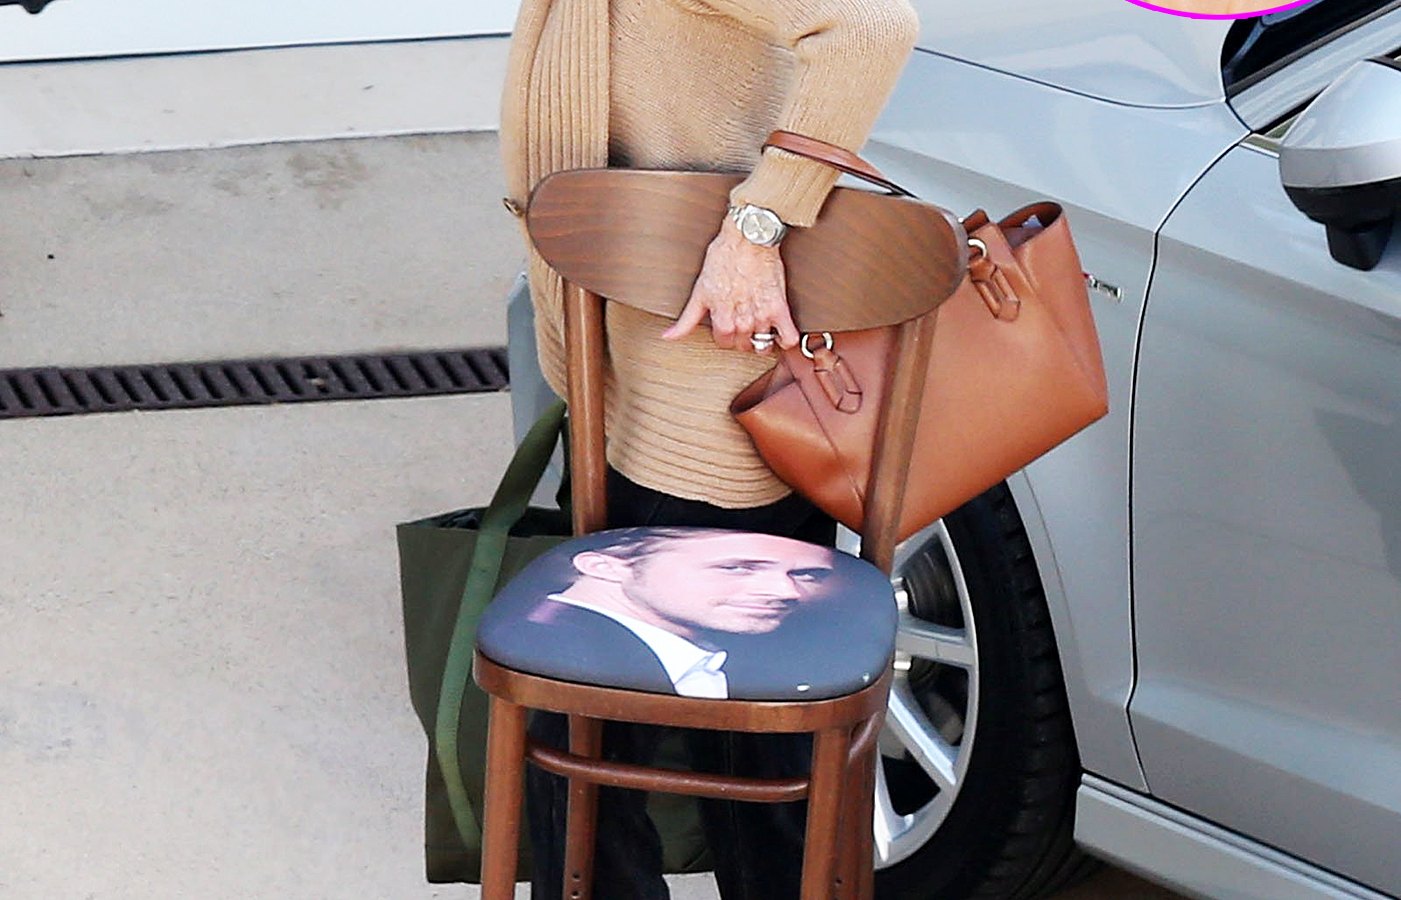 Jane Fonda carries a chair with Ryan Gosling's face on it